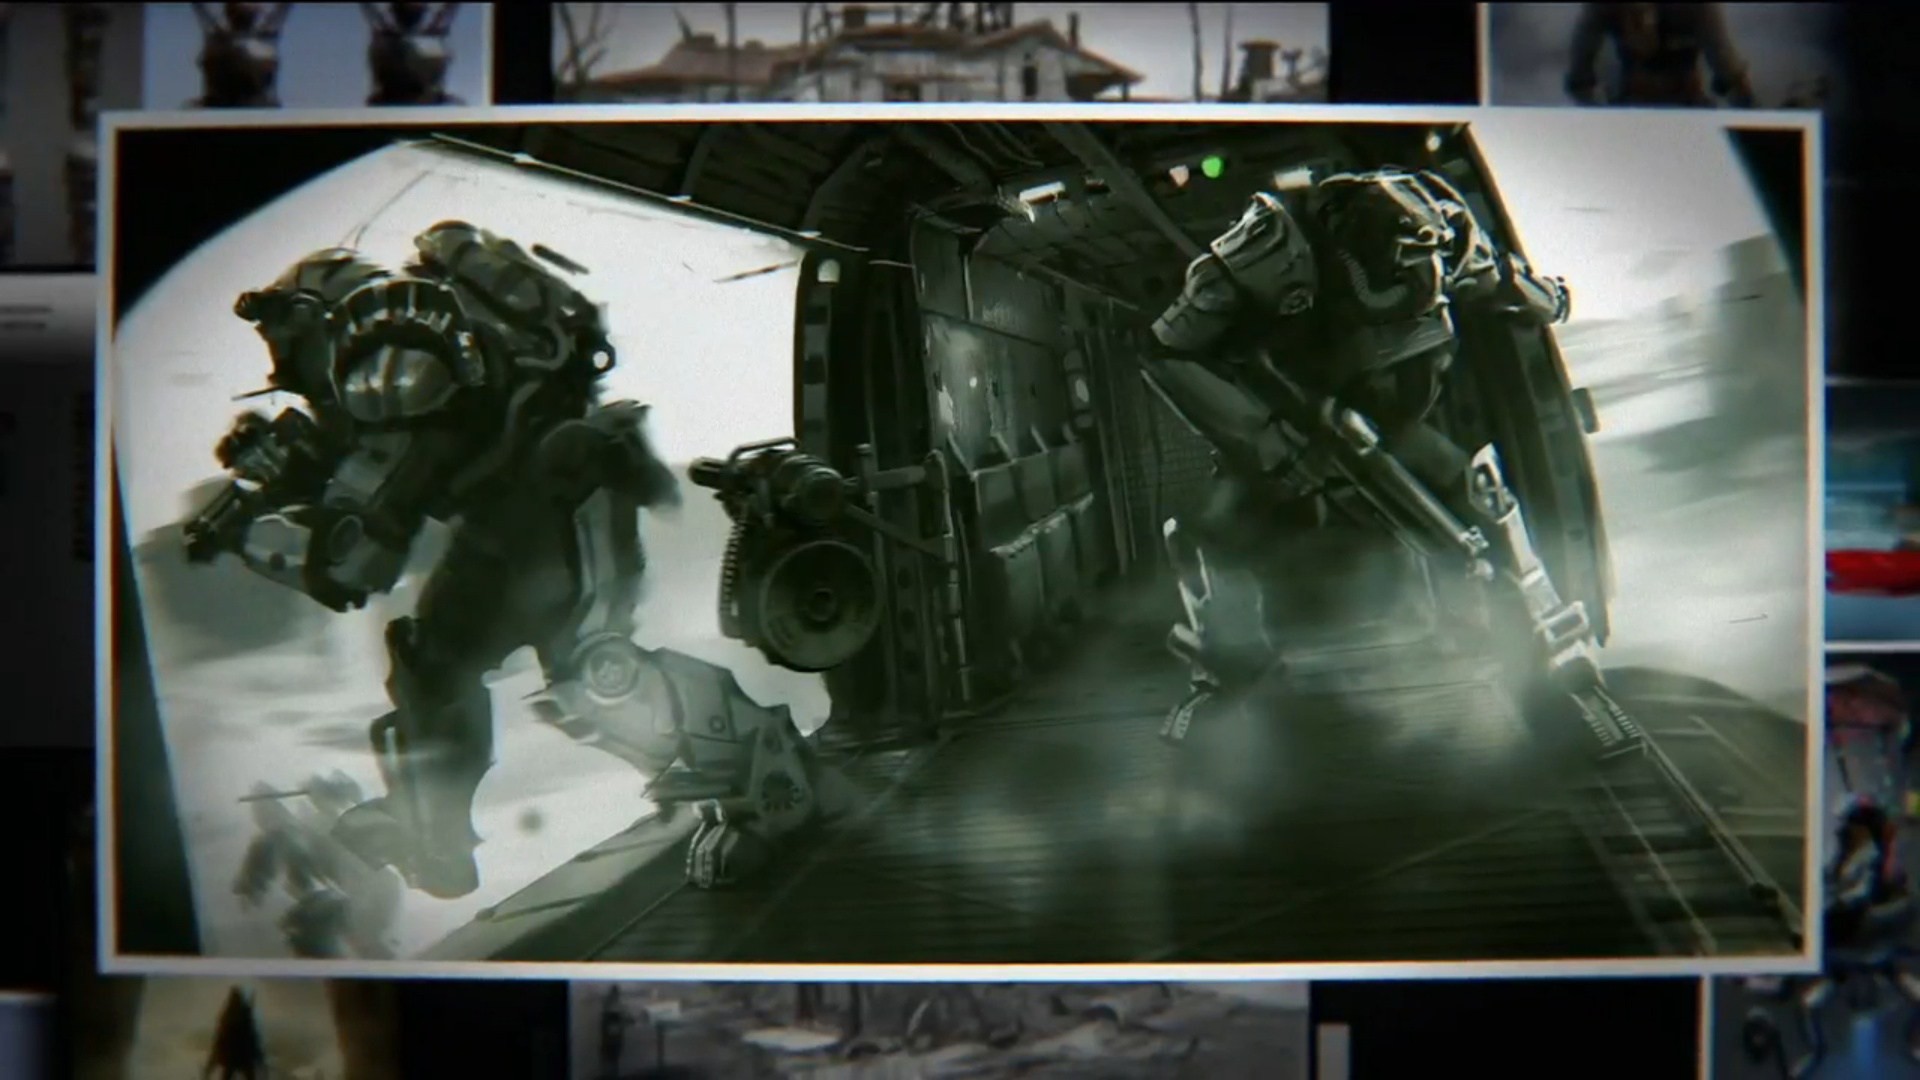 1920x1080 Fallout 4 Concept Art Screenshots from Bethesda Conference E3 2015